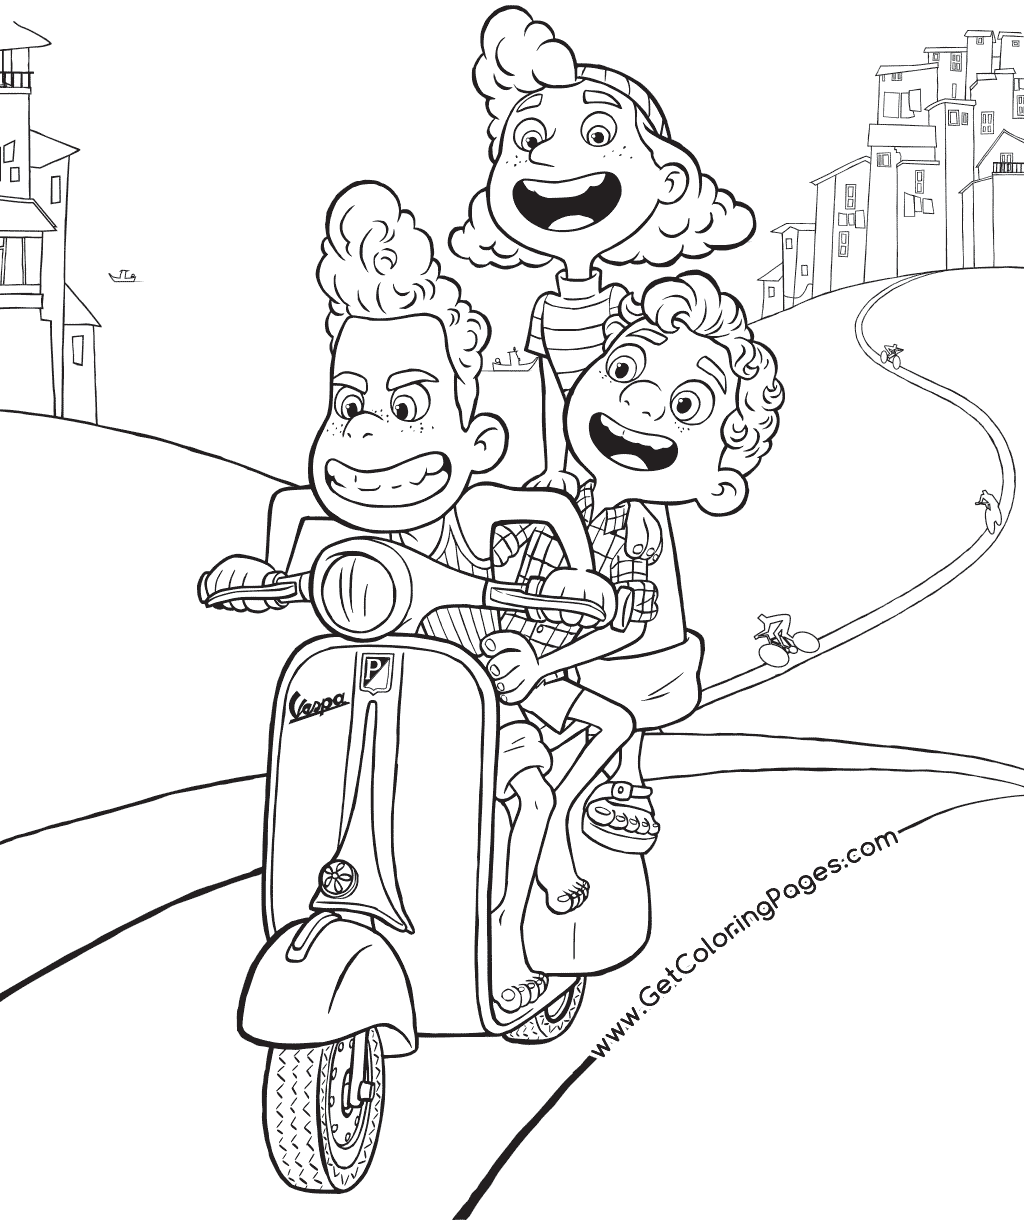 Disney Luca Coloring Page - Get Coloring Pages